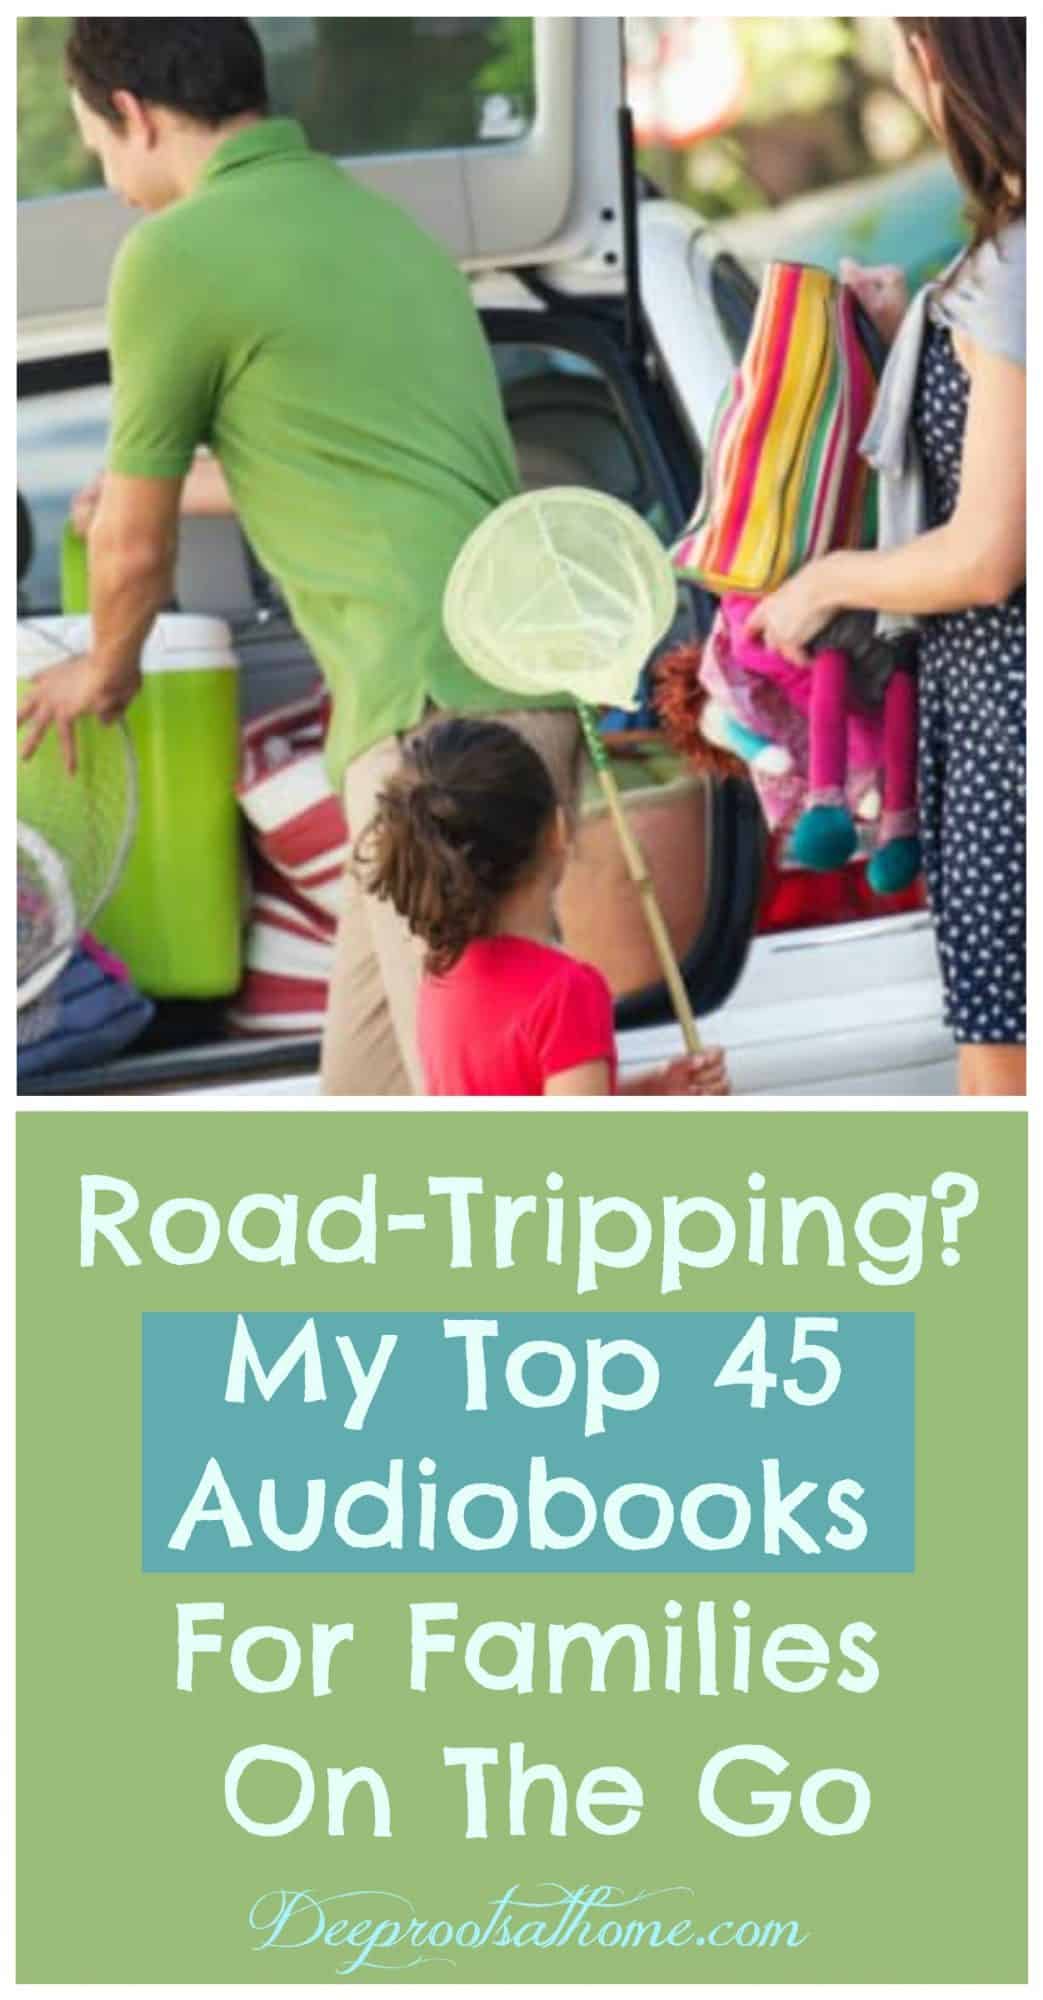 Road-Tripping This Summer? Winning Audiobooks For Families, family packing car for road trip